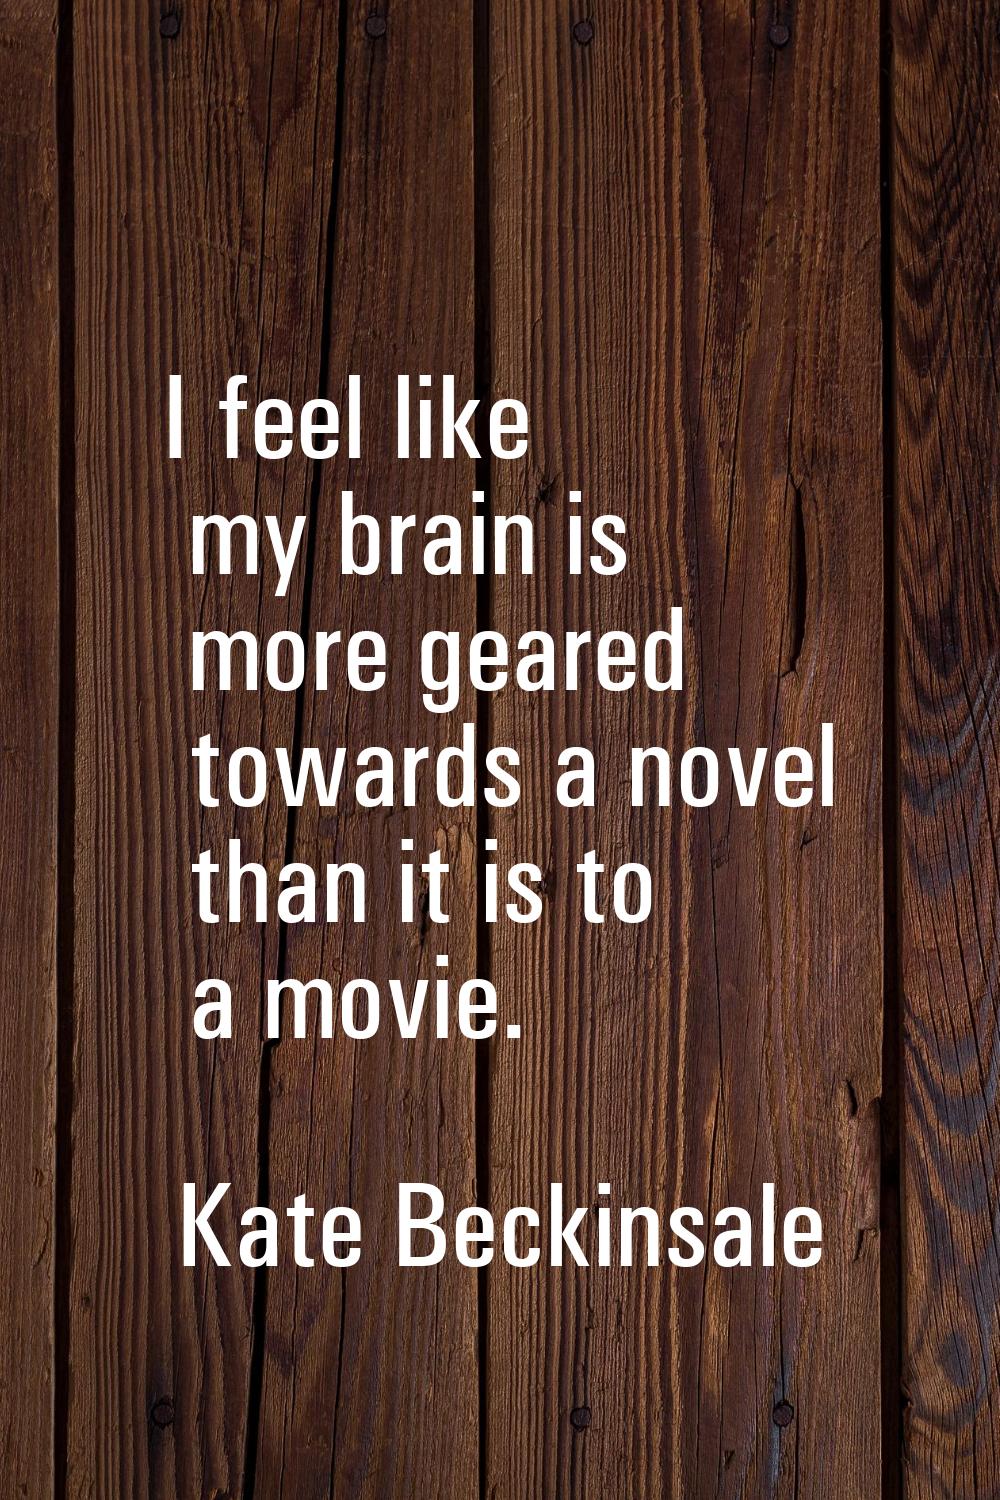 I feel like my brain is more geared towards a novel than it is to a movie.